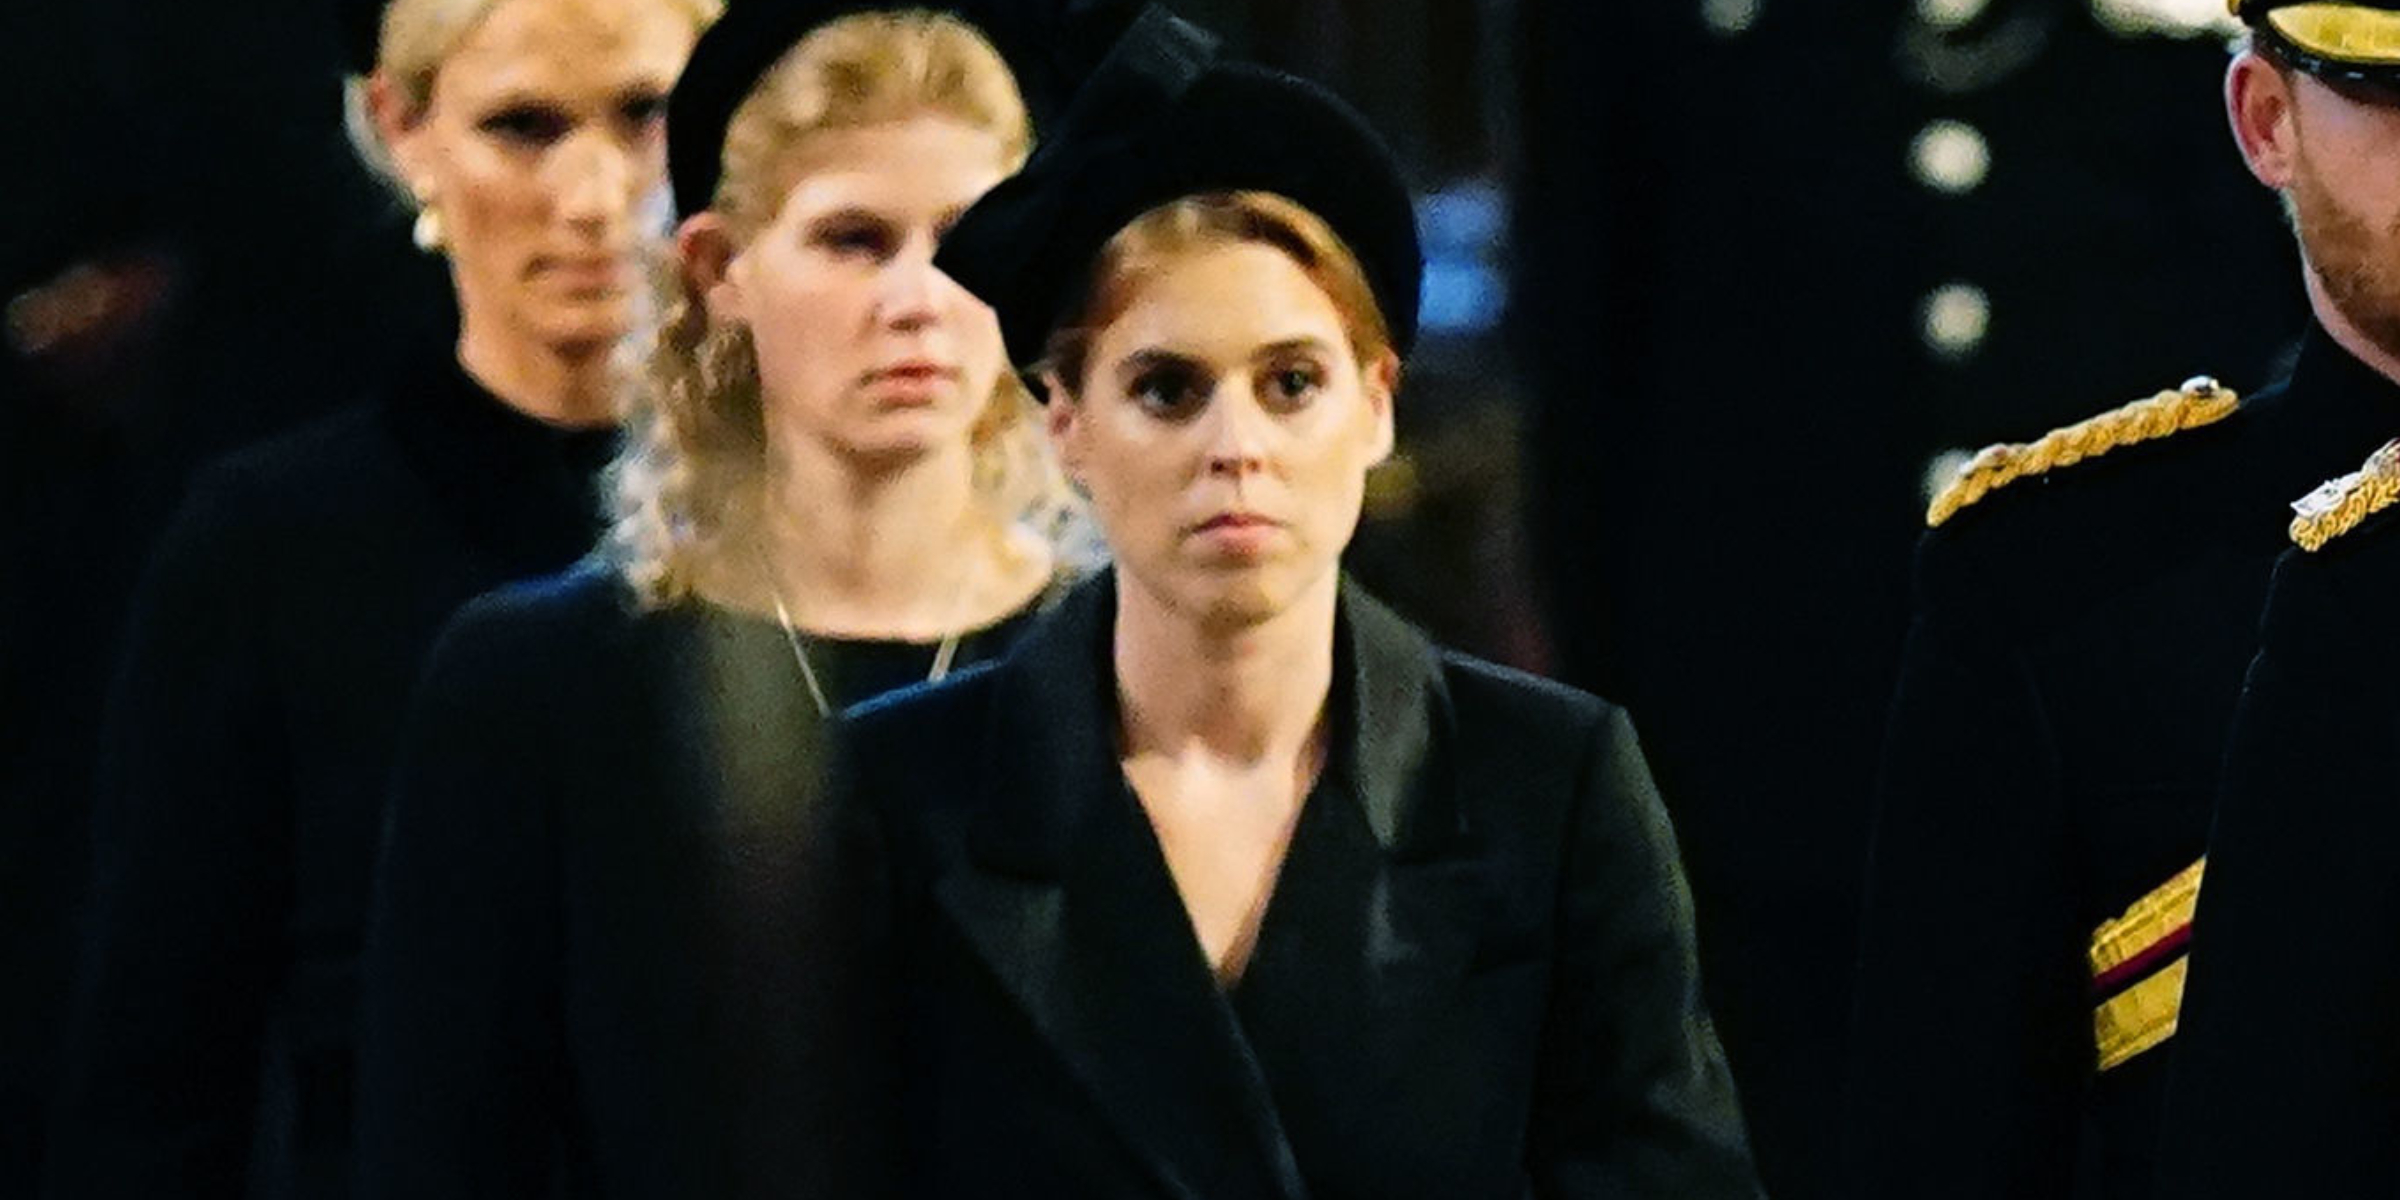 Princess Beatrice | Source: Getty Images